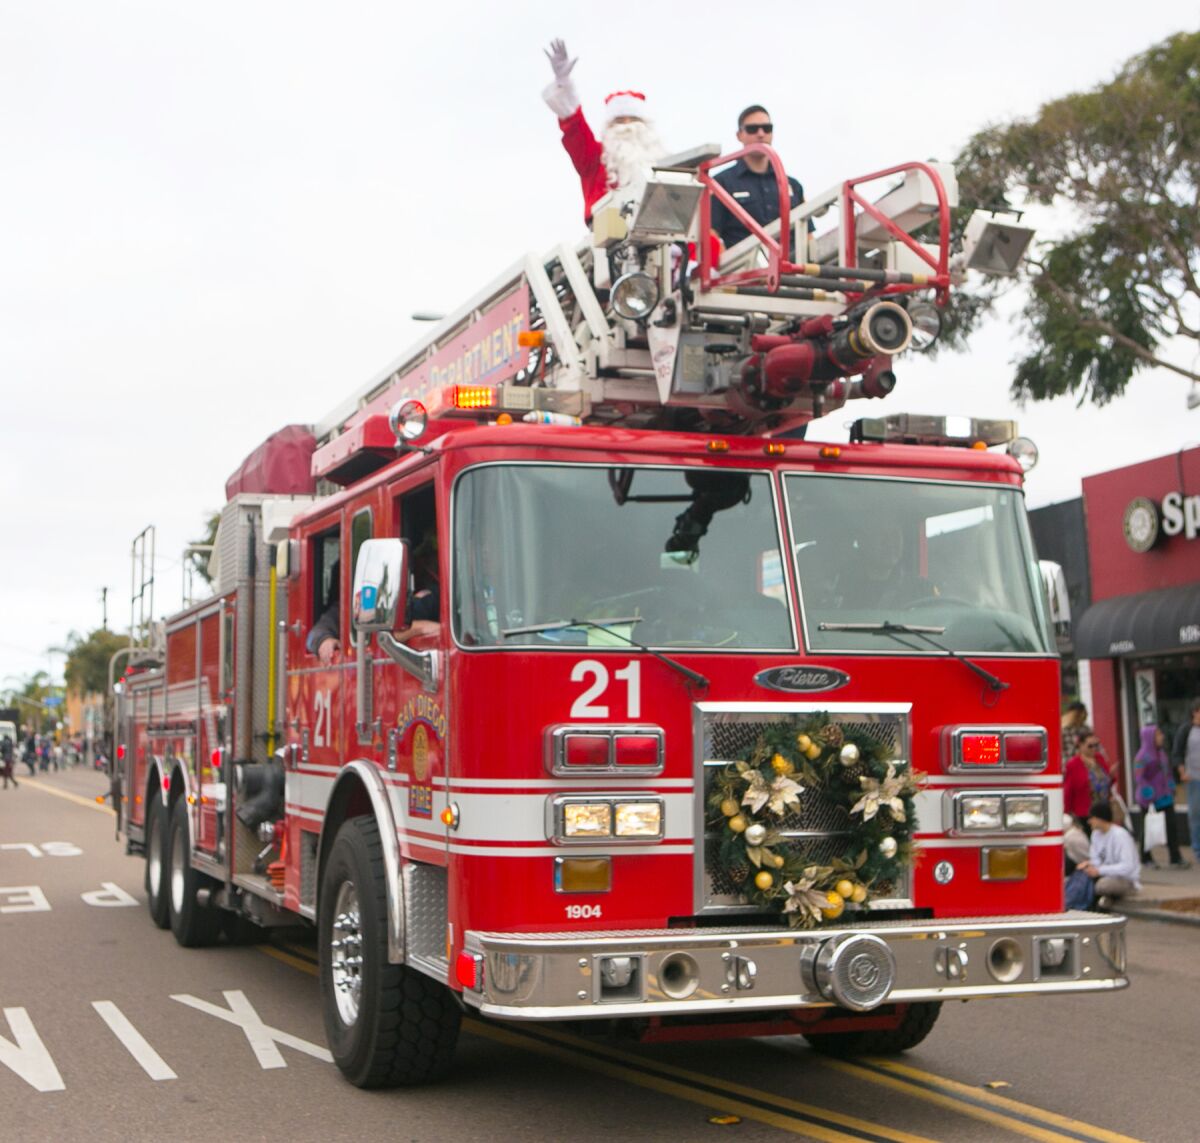 The crew at Fire Station No. 21 helped Santa Claus make an appearance in a previous Pacific Beach Holiday Parade.